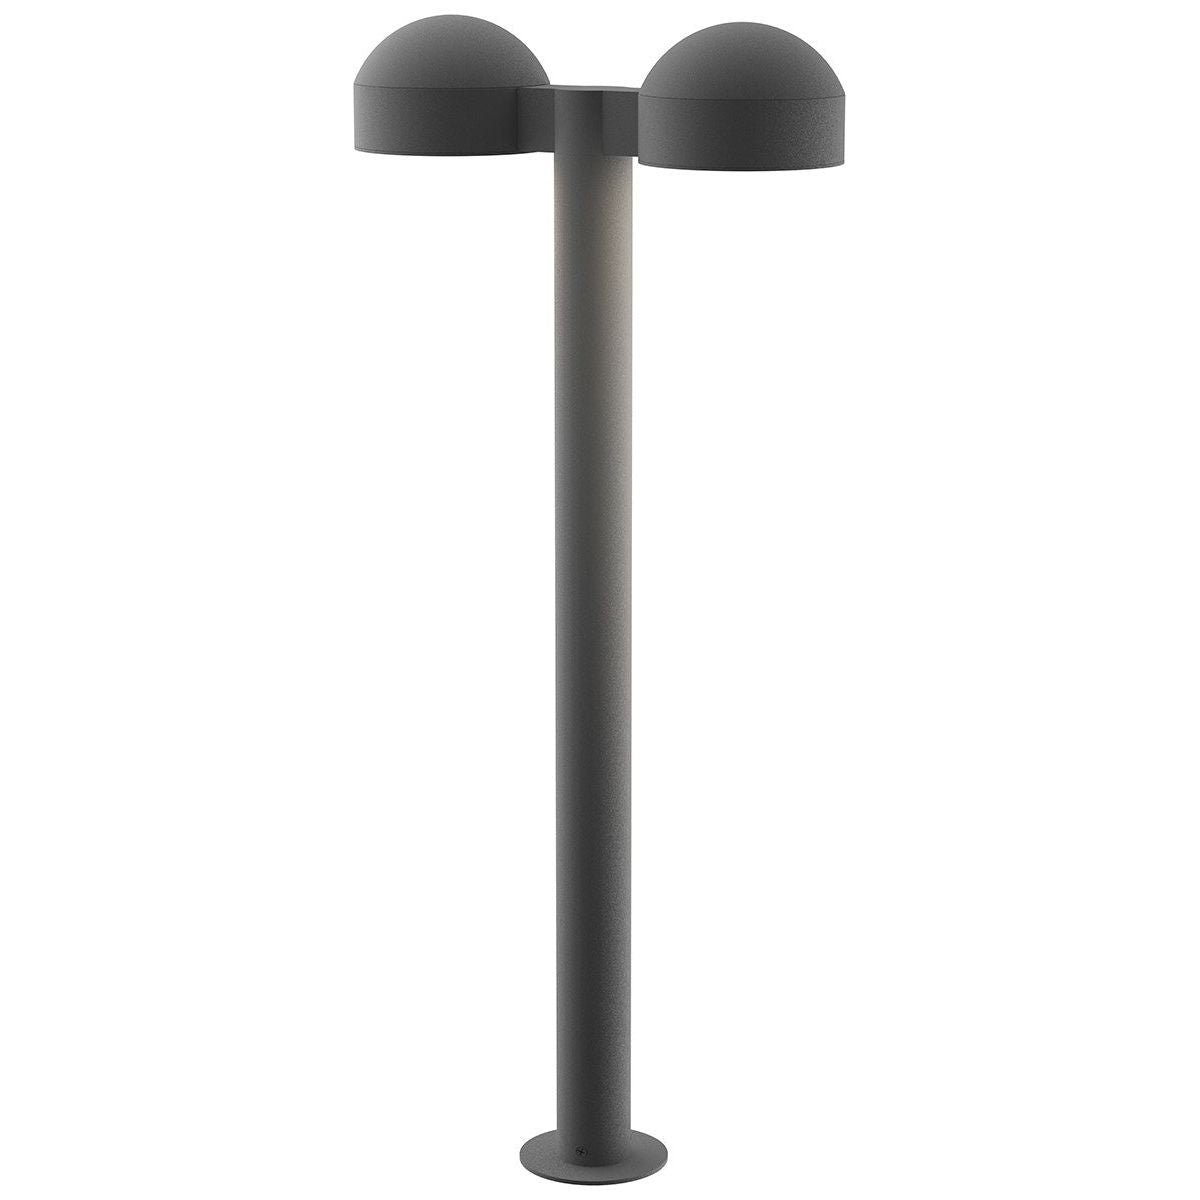 REALS 28" LED Double Bollard with Dome Cap and Plate Lens